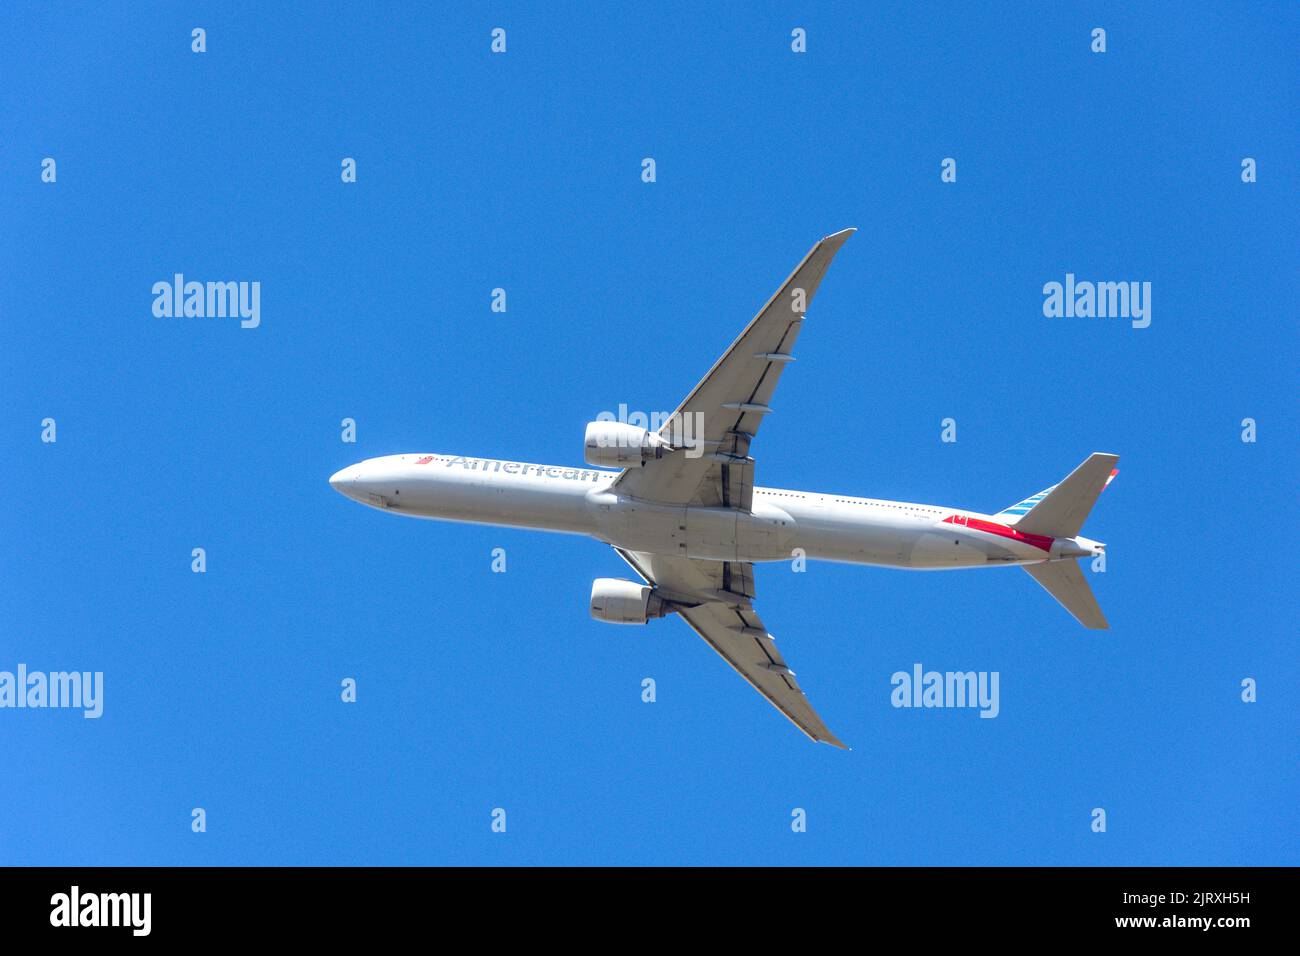 American Airlines Boeing 777-300ER aircraft taking off from Heathrow Airport, Greater London, England, United Kingdom Stock Photo